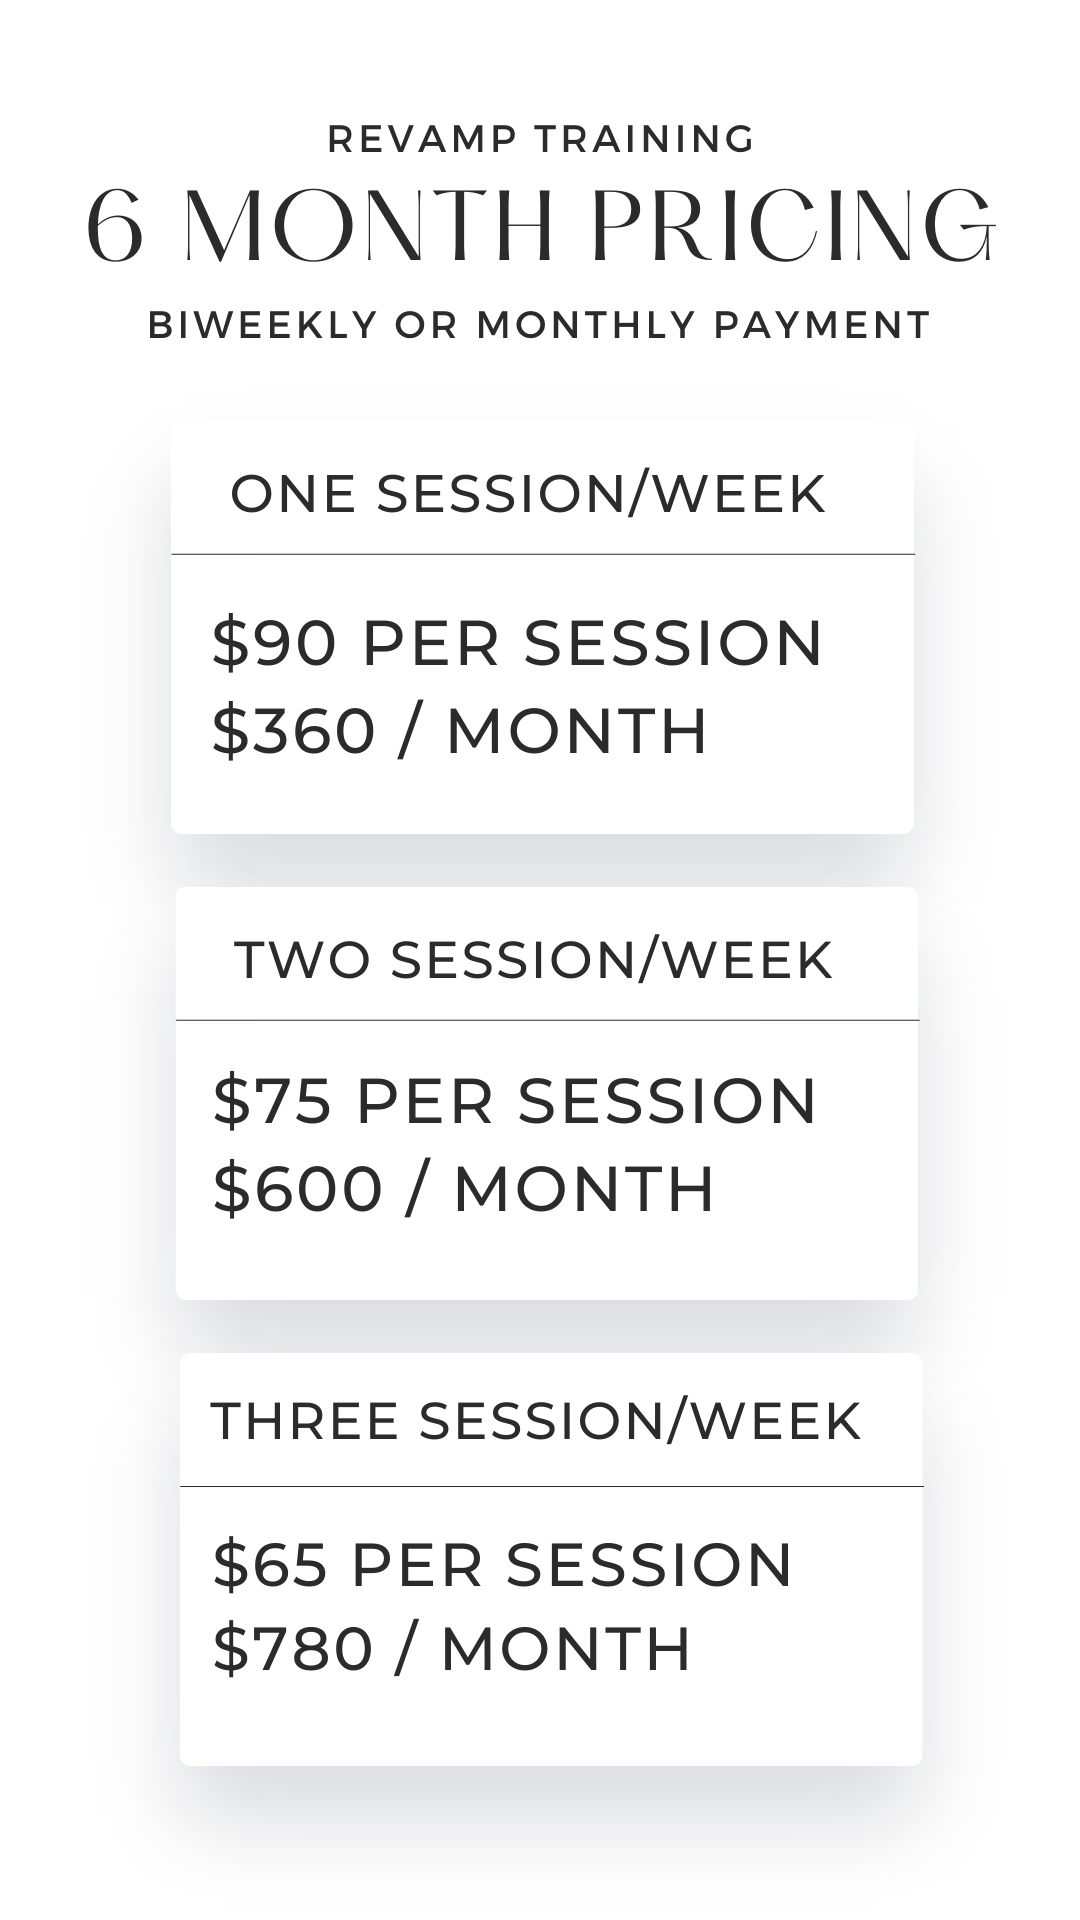 6 month pricing image